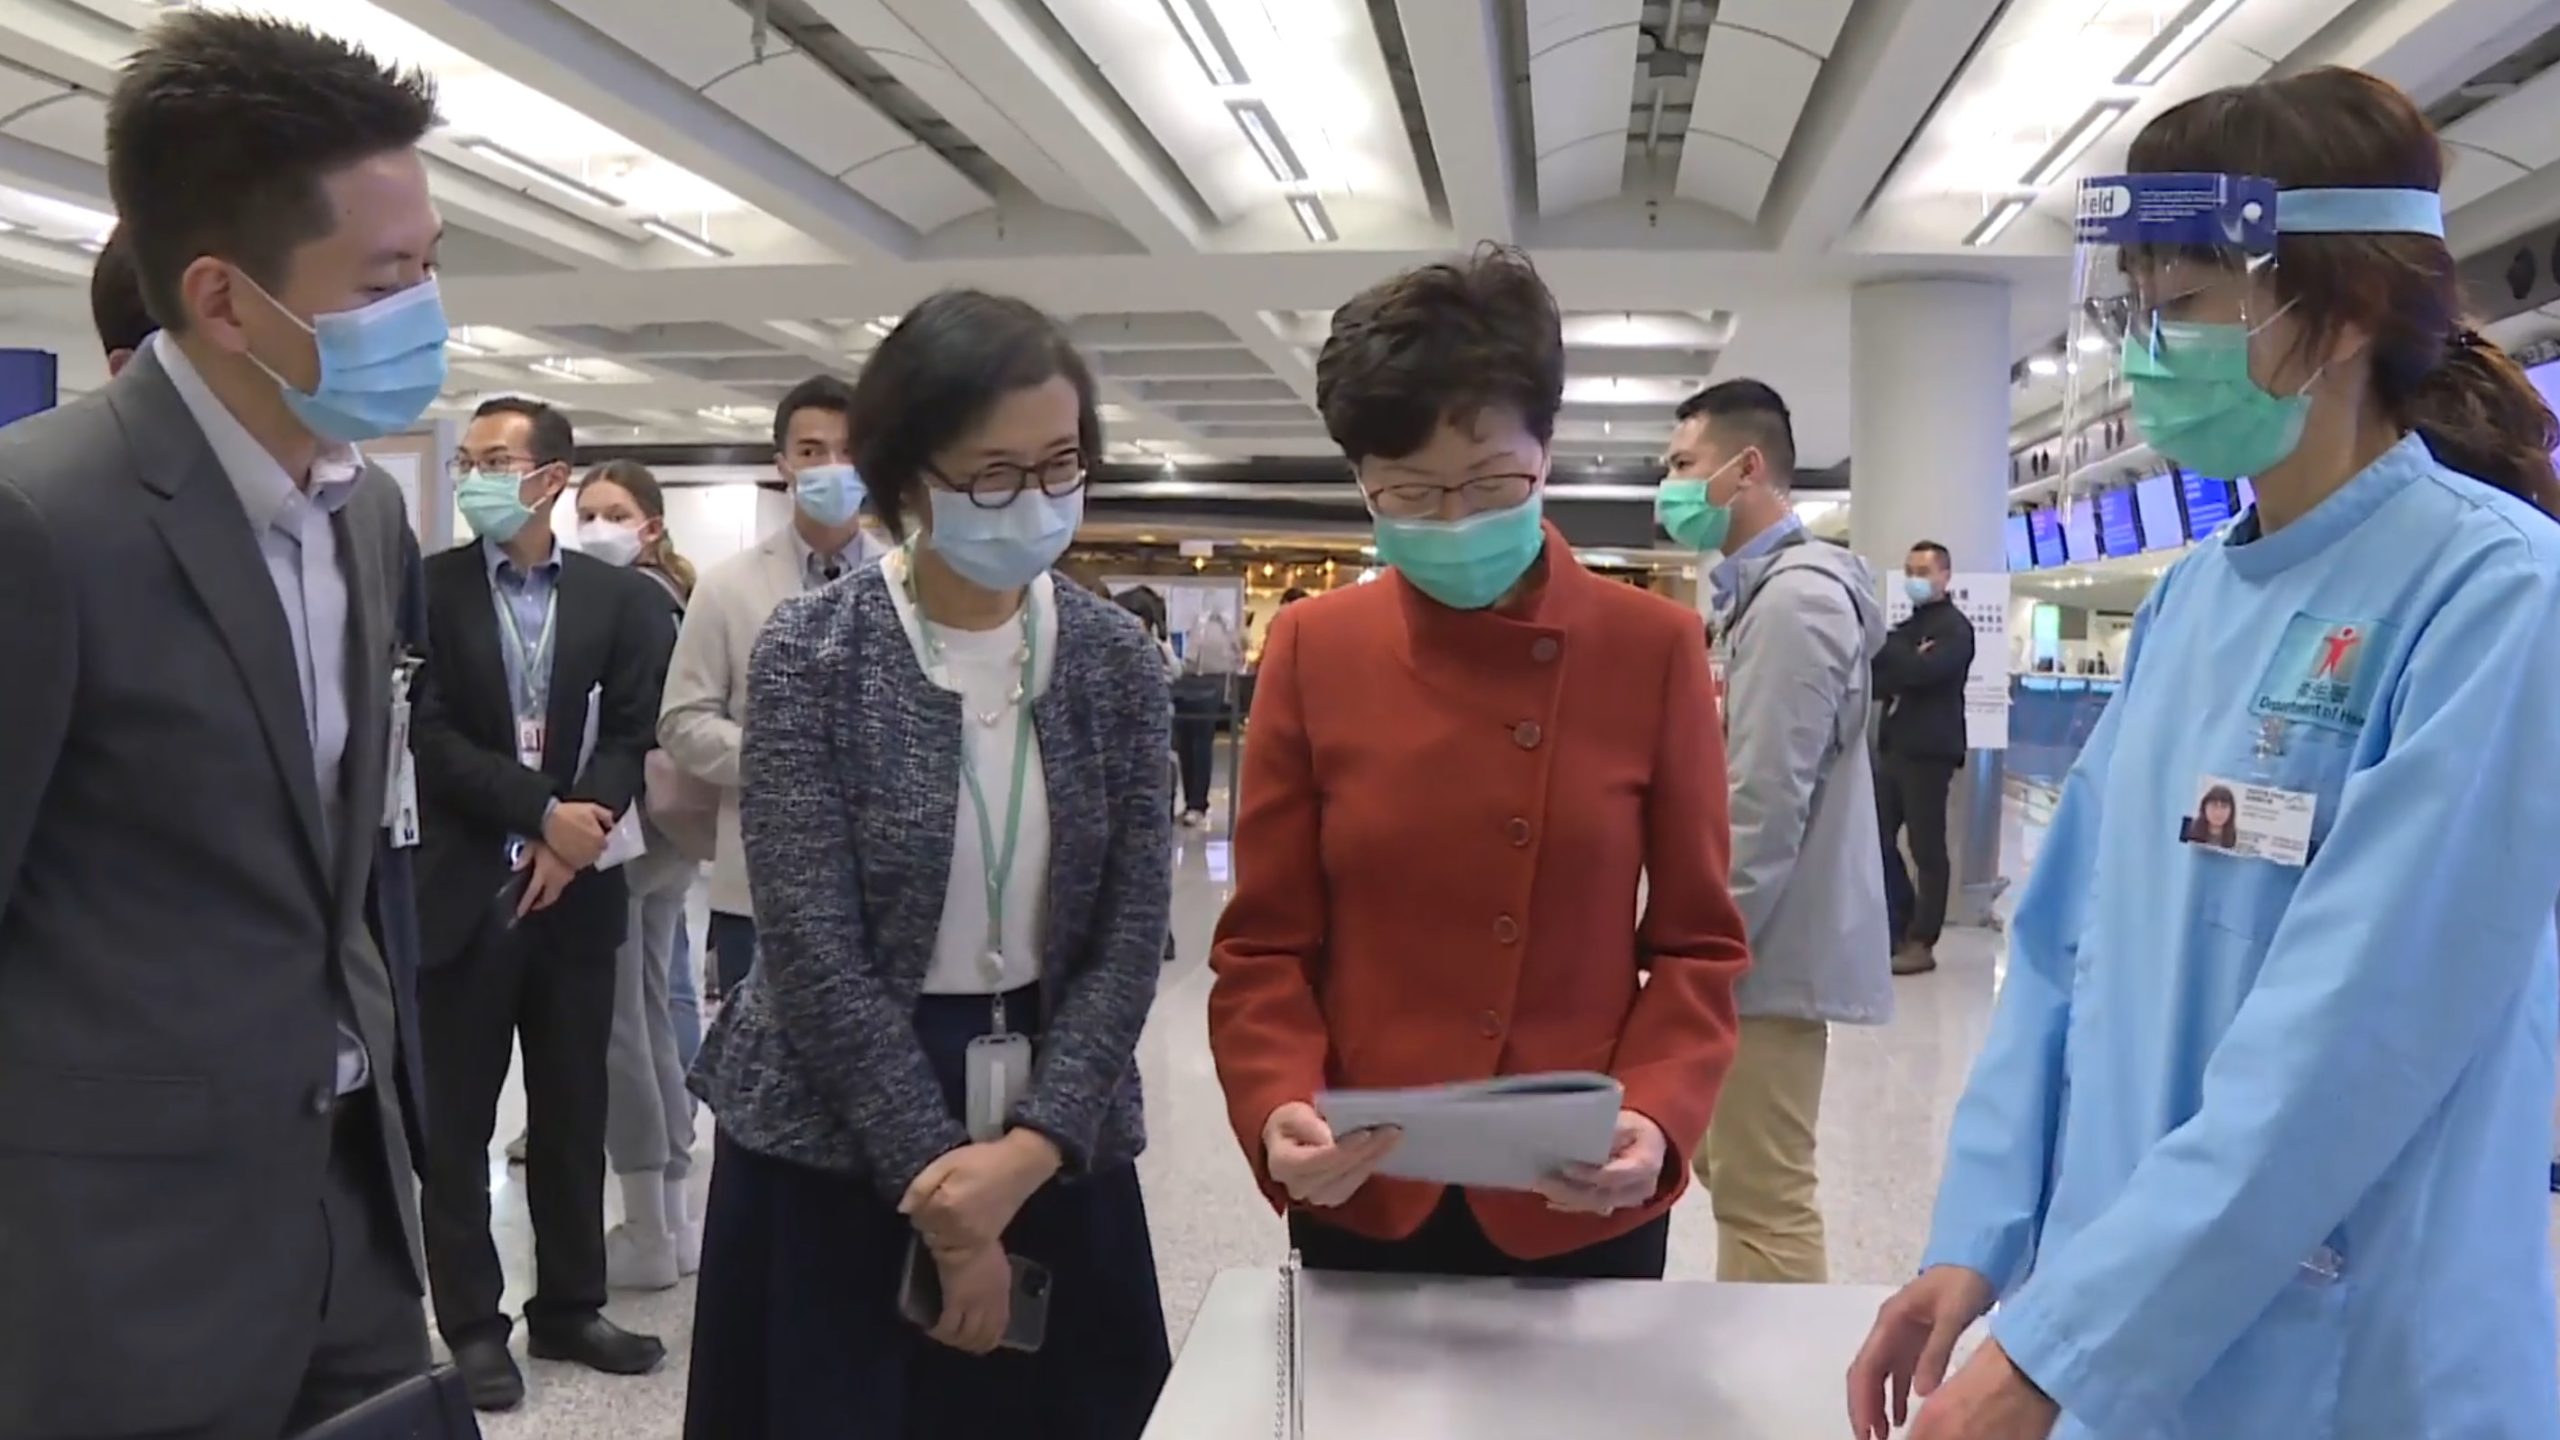 Chief Executive Carrie Lam visits Hong Kong International Airport late last week. Lam today announced a sweeping ban on arrivals into the city, as well as a proposed legal amendment to limit the sale of alcohol and bars and restaurants to limit the spread of COVID-19. Screengrab via Facebook.